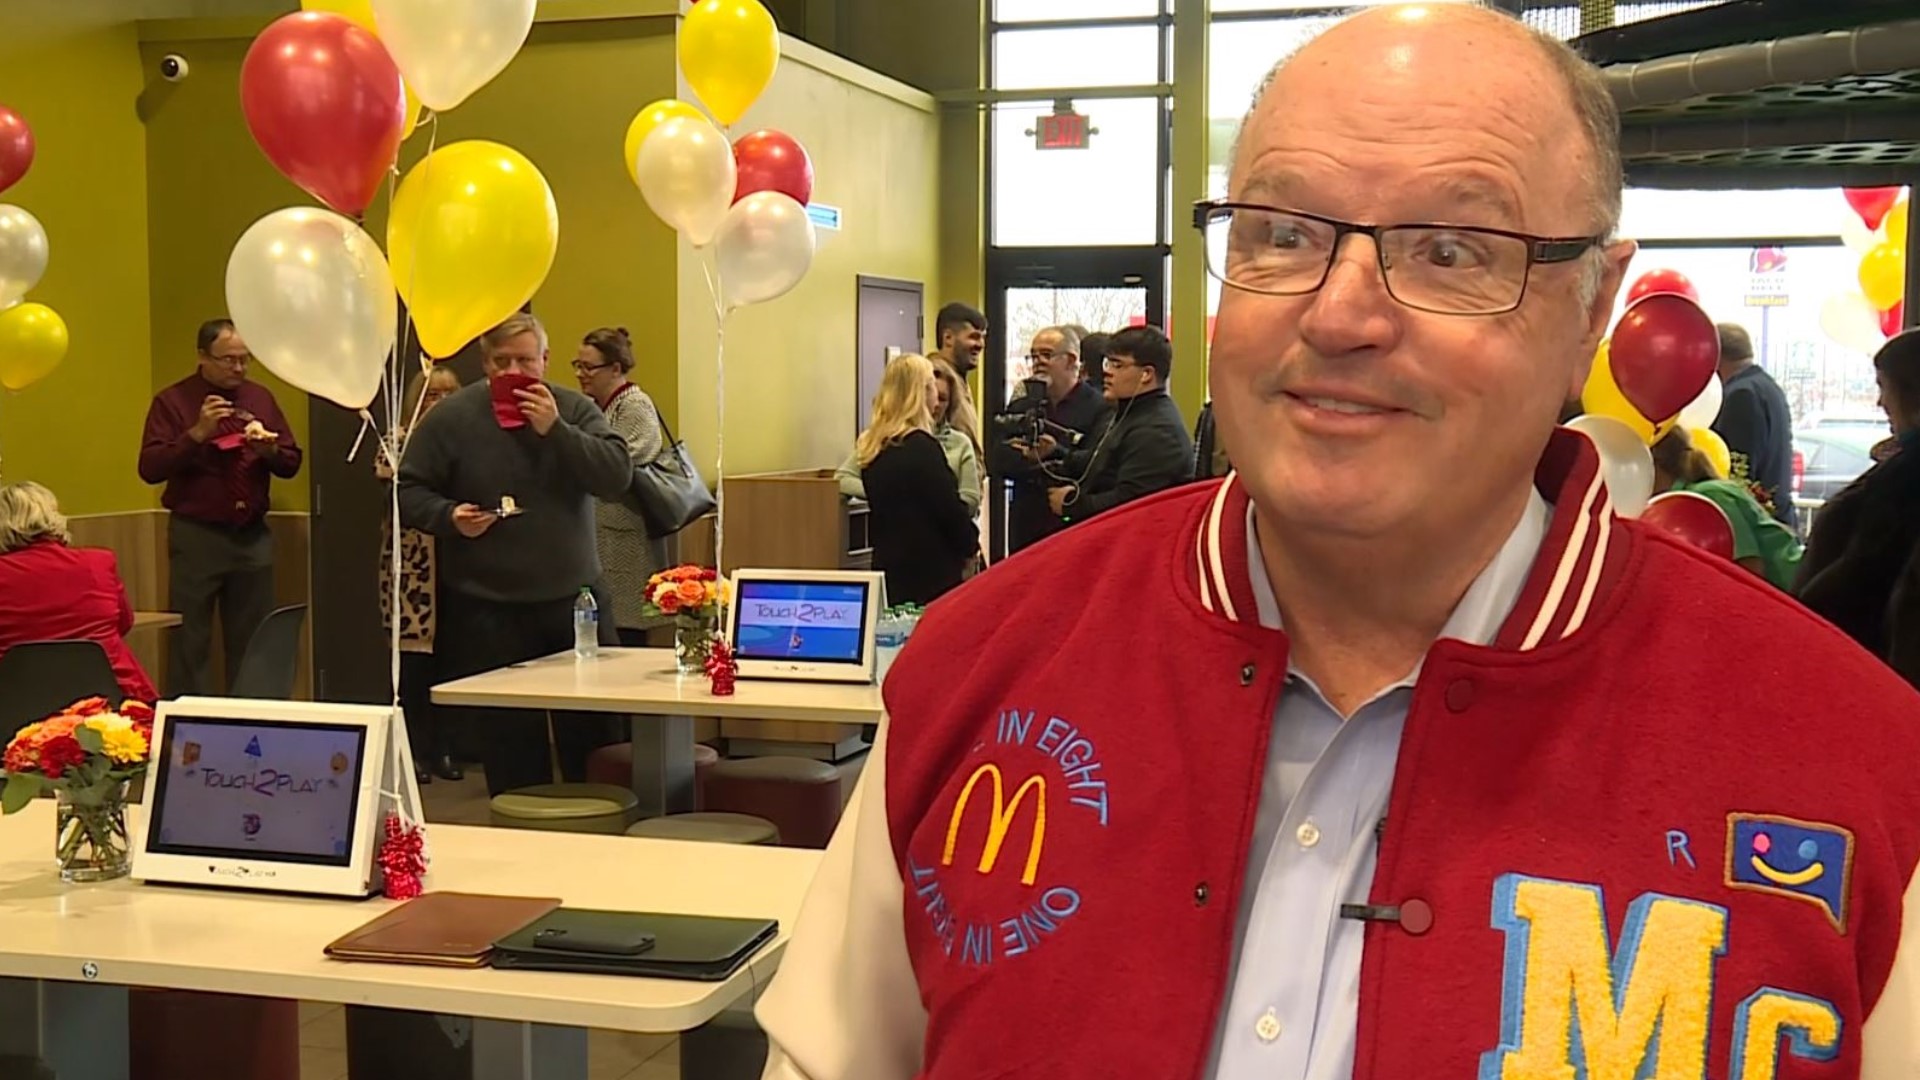 Bill Matthews began working at a Fayetteville McDonald's back in 1973. He now owns 35 different locations in Arkansas, Missouri, and Oklahoma.